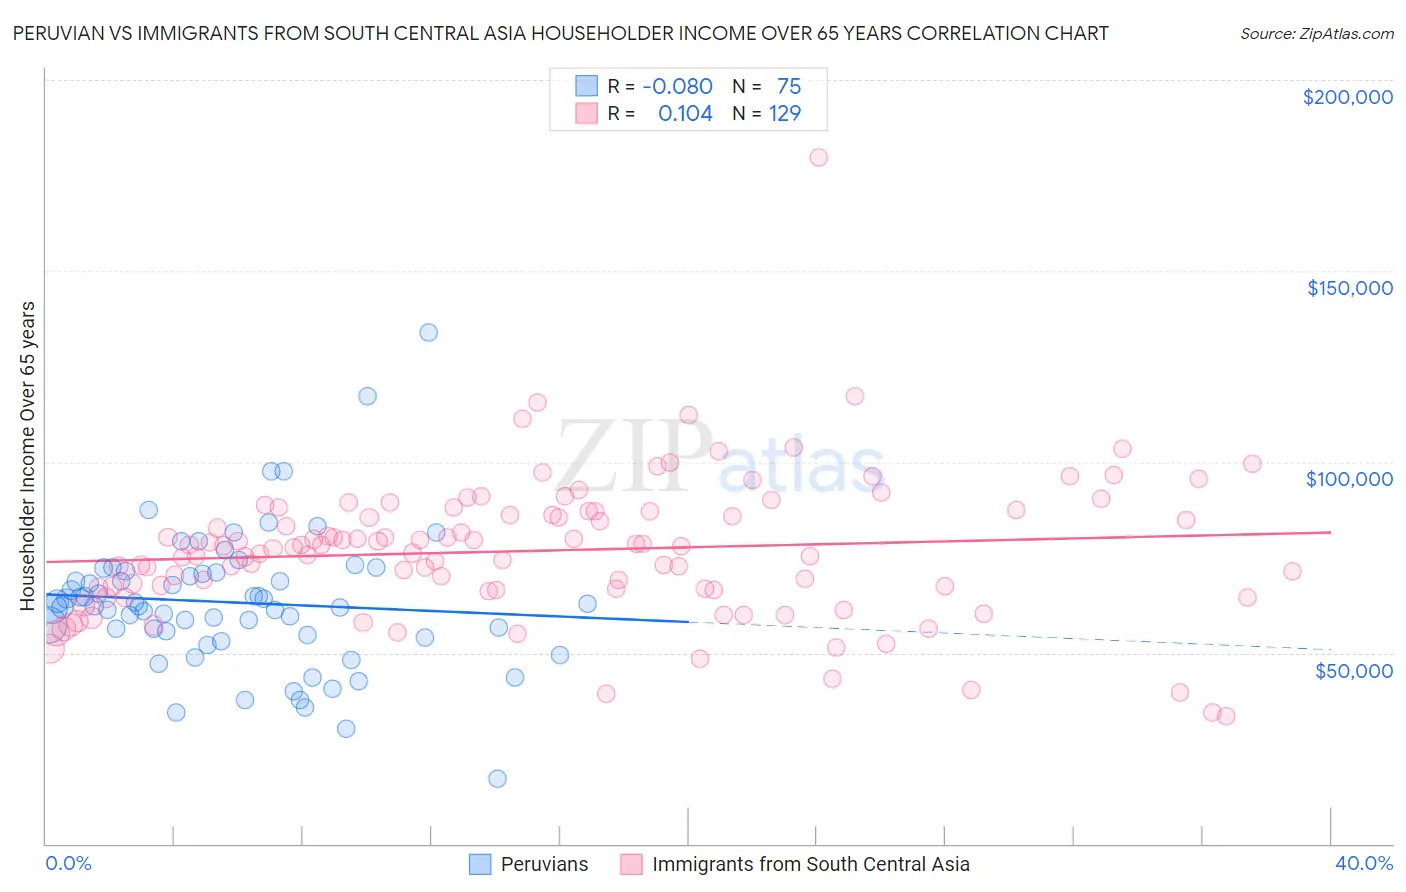 Peruvian vs Immigrants from South Central Asia Householder Income Over 65 years